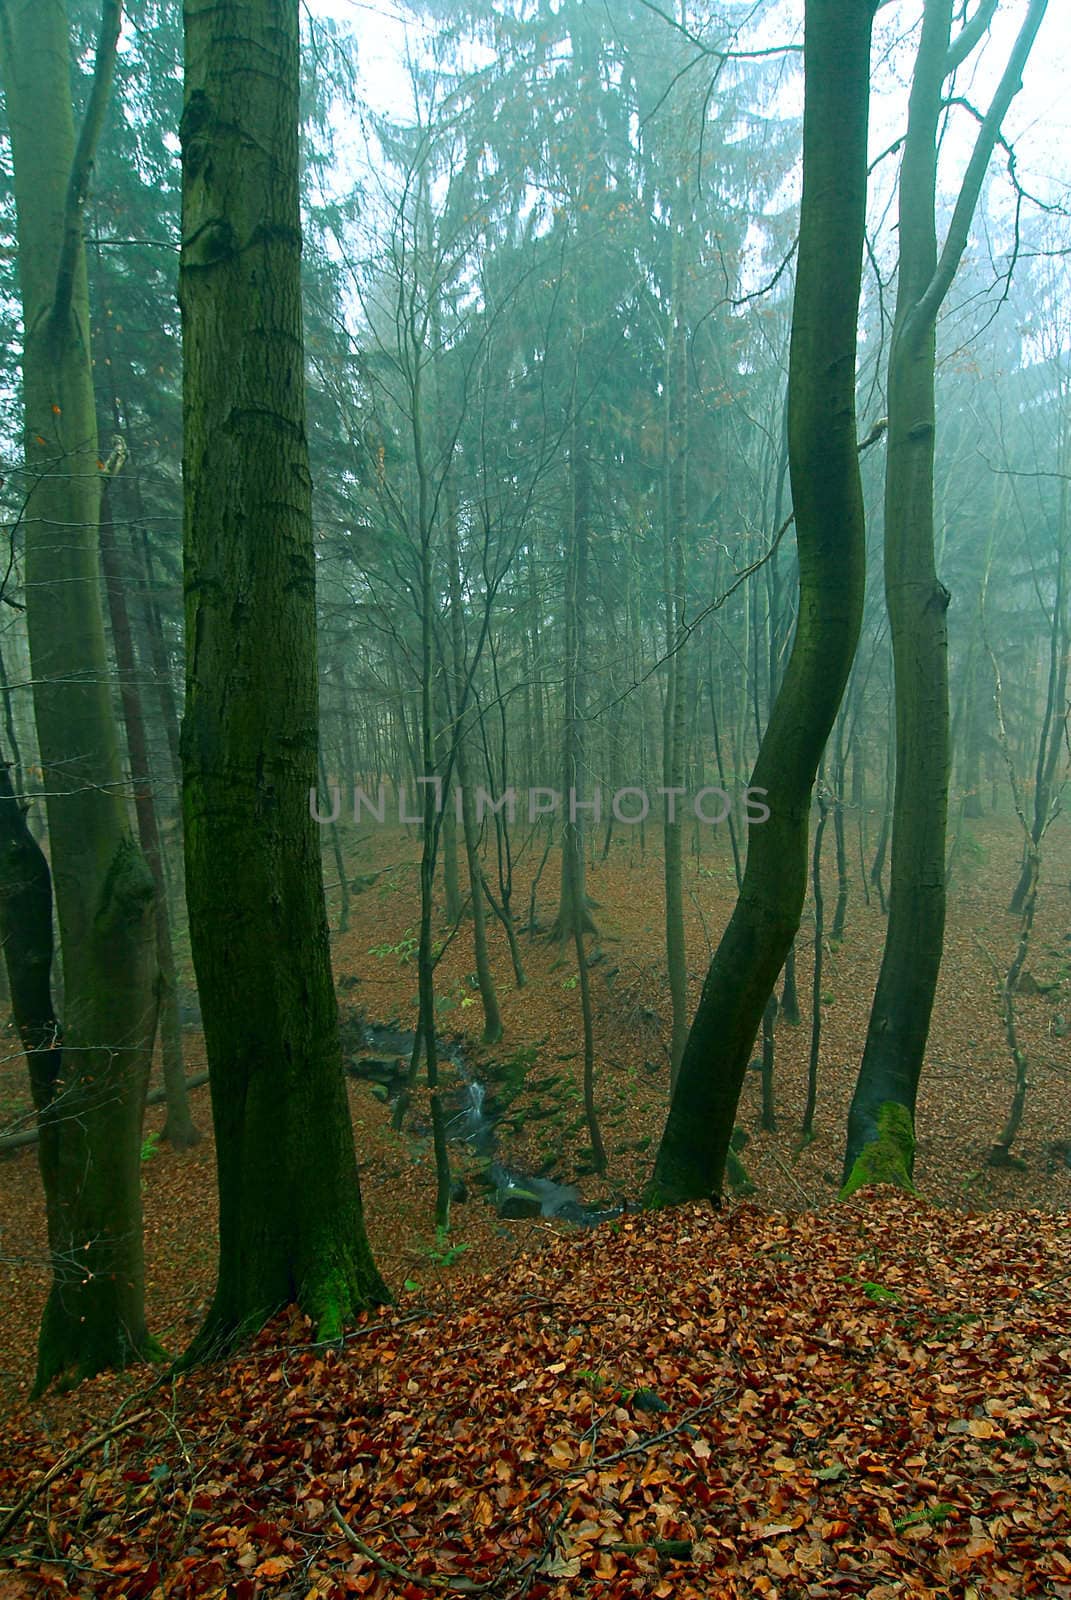 Mystical condition of a forest in the early morning